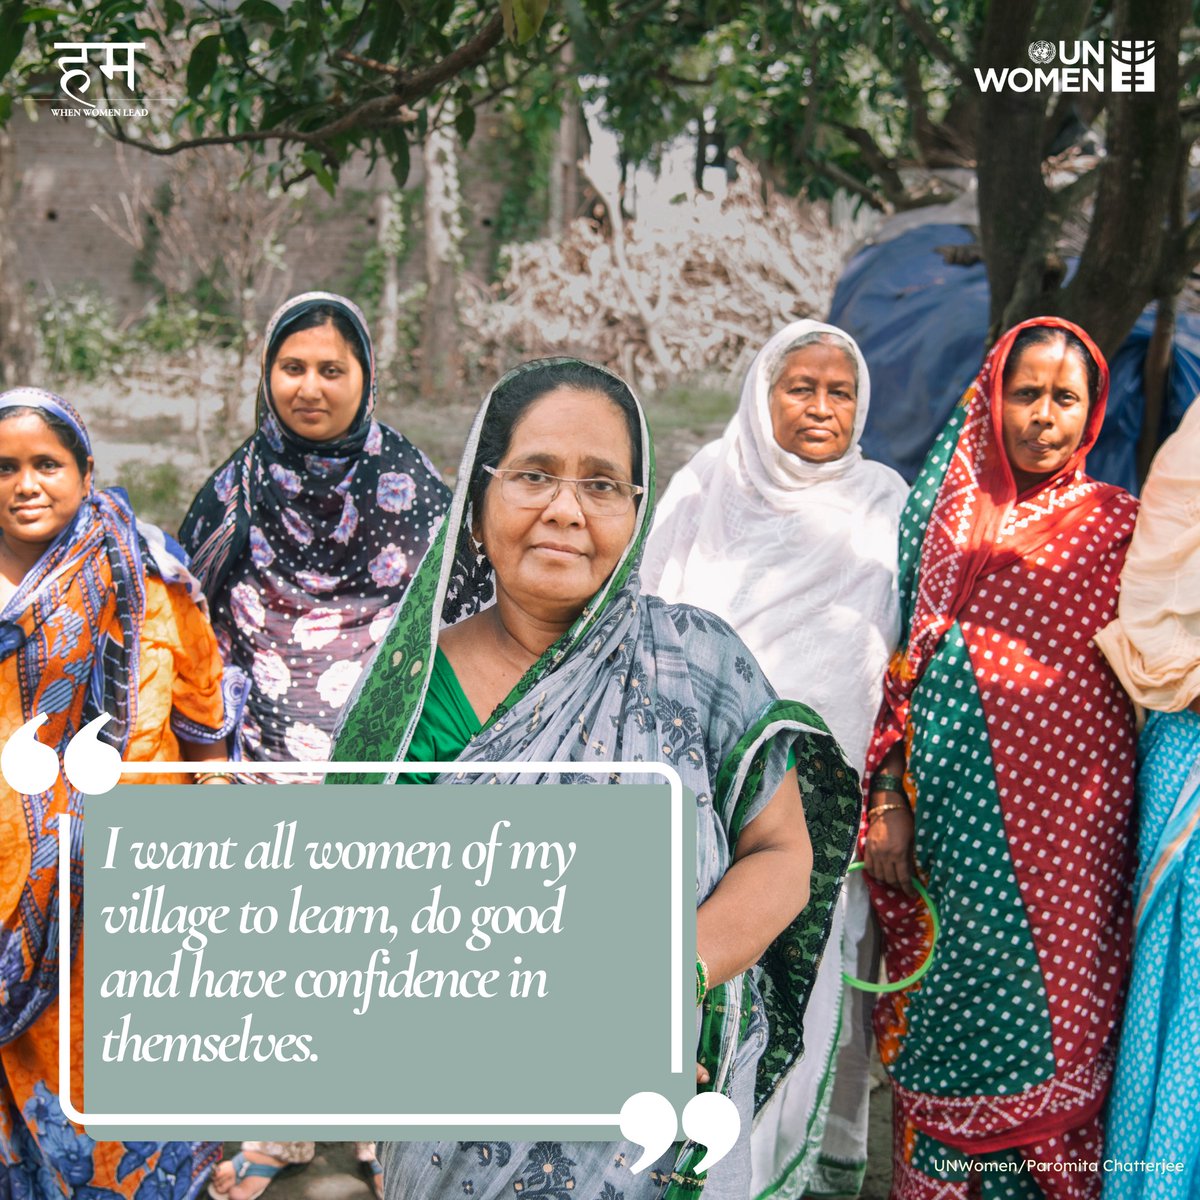 #WhenWomenLead, they transform societal attitudes. Due to Tajkira’s efforts, women in her community now contribute to their households, provide education for their children, and have gained financial autonomy.